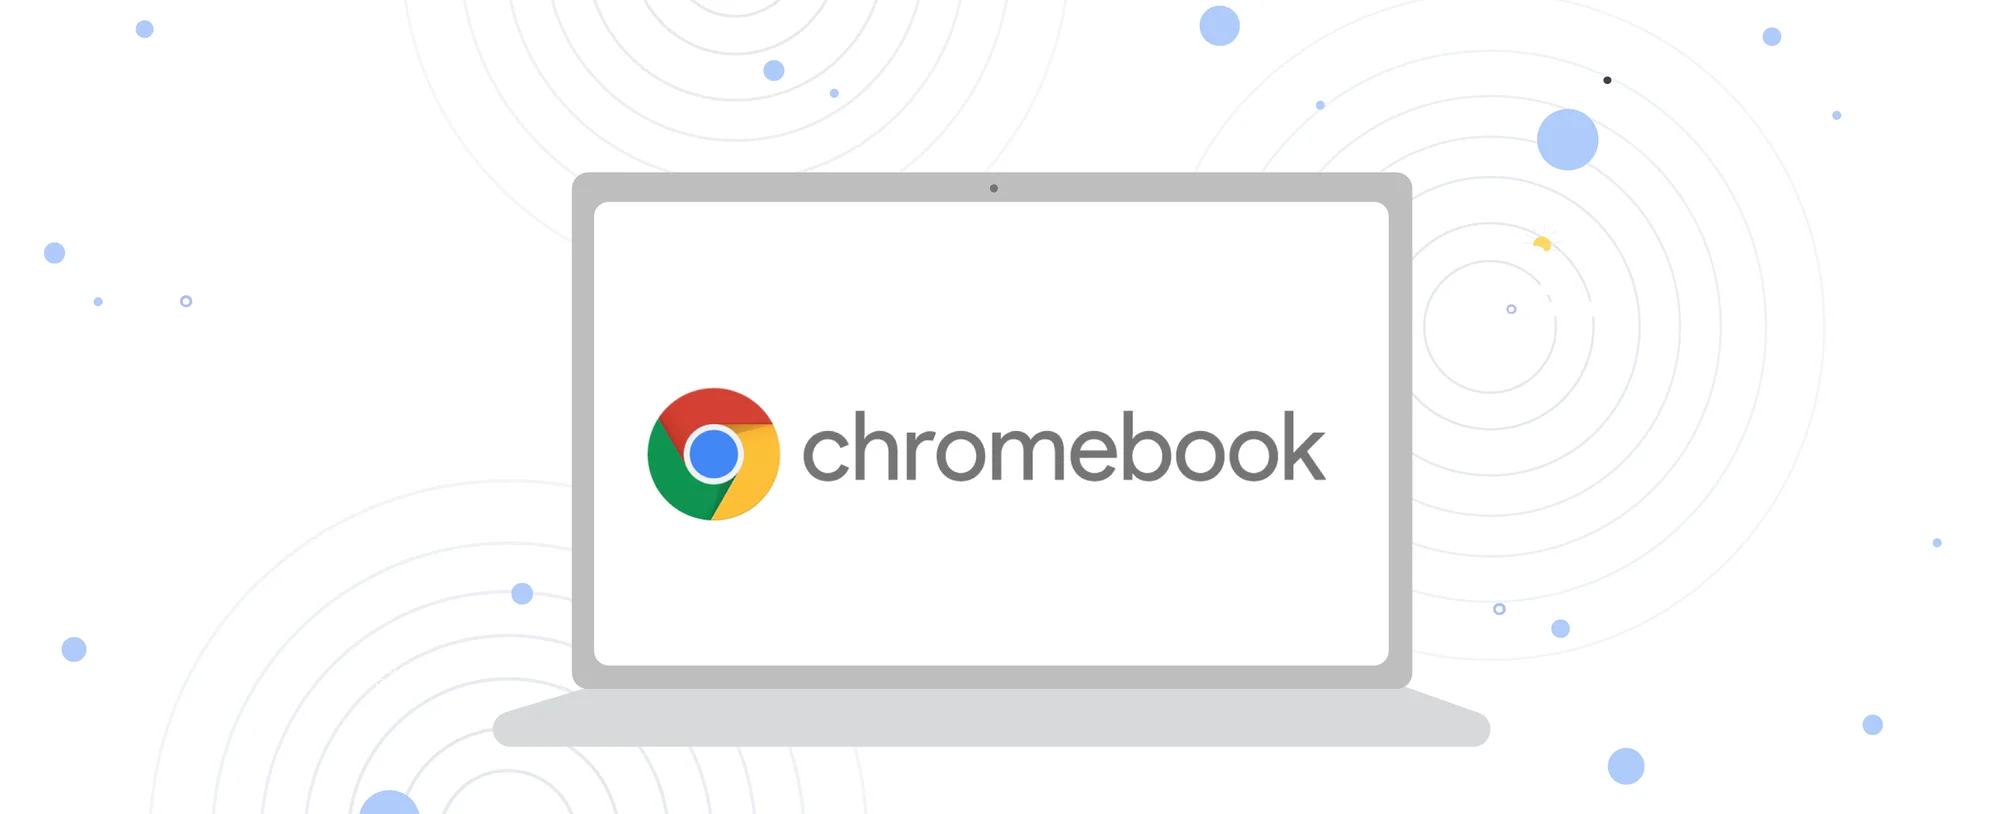 why can i not download roblox can chrome do like an update so i can? -  Chromebook Community